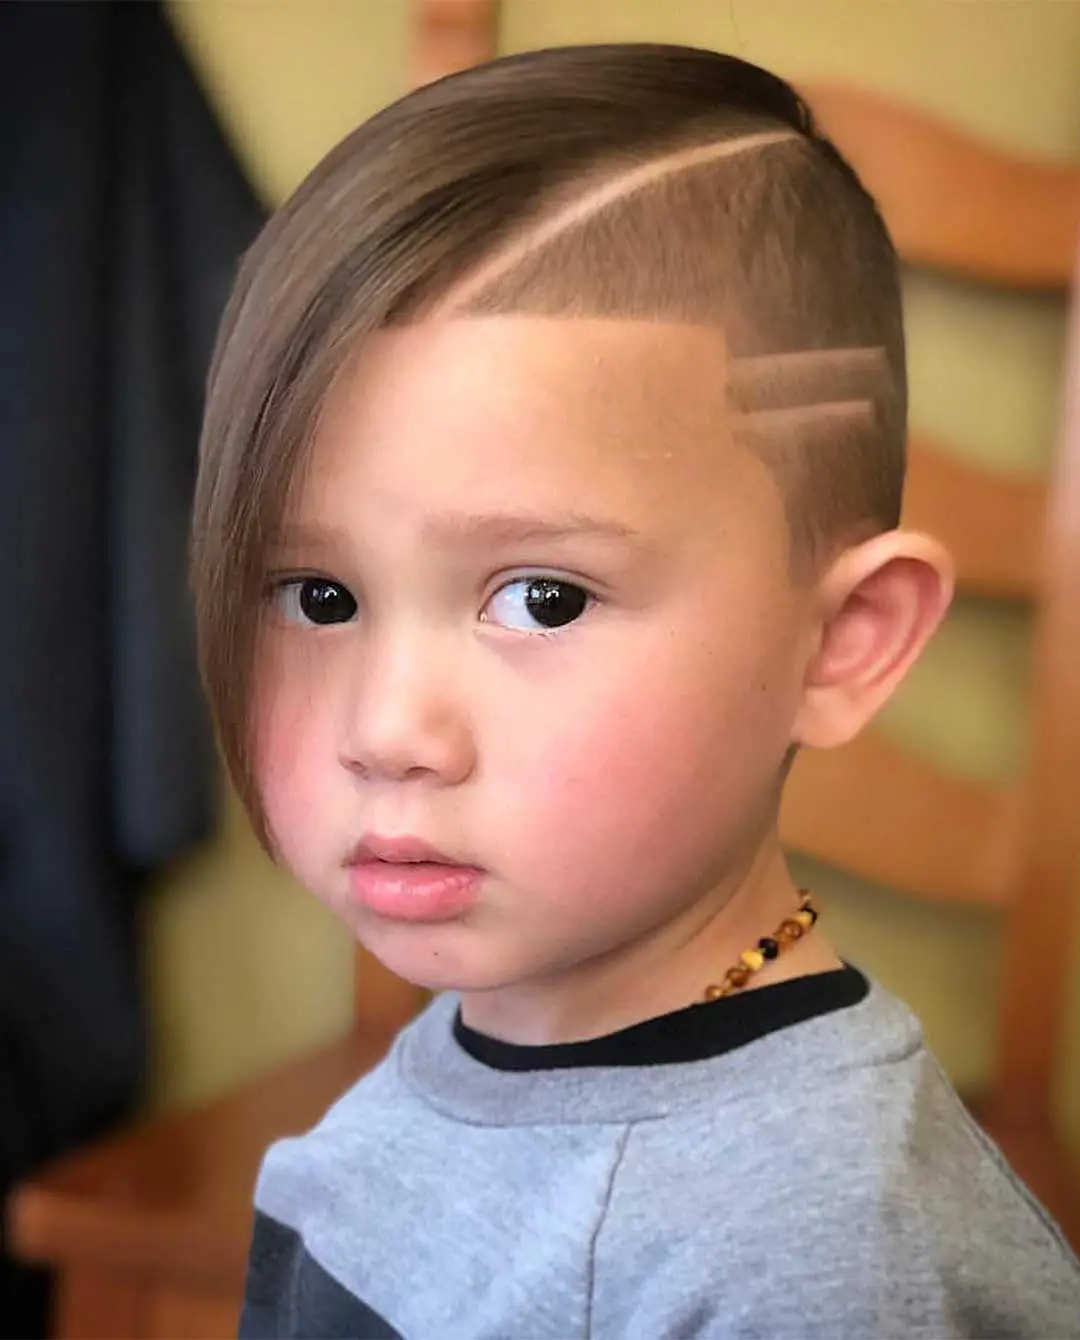 Best Kids Haircuts 2019  Easy Hairstyle For Boys  Hair Tutorial  YouTube